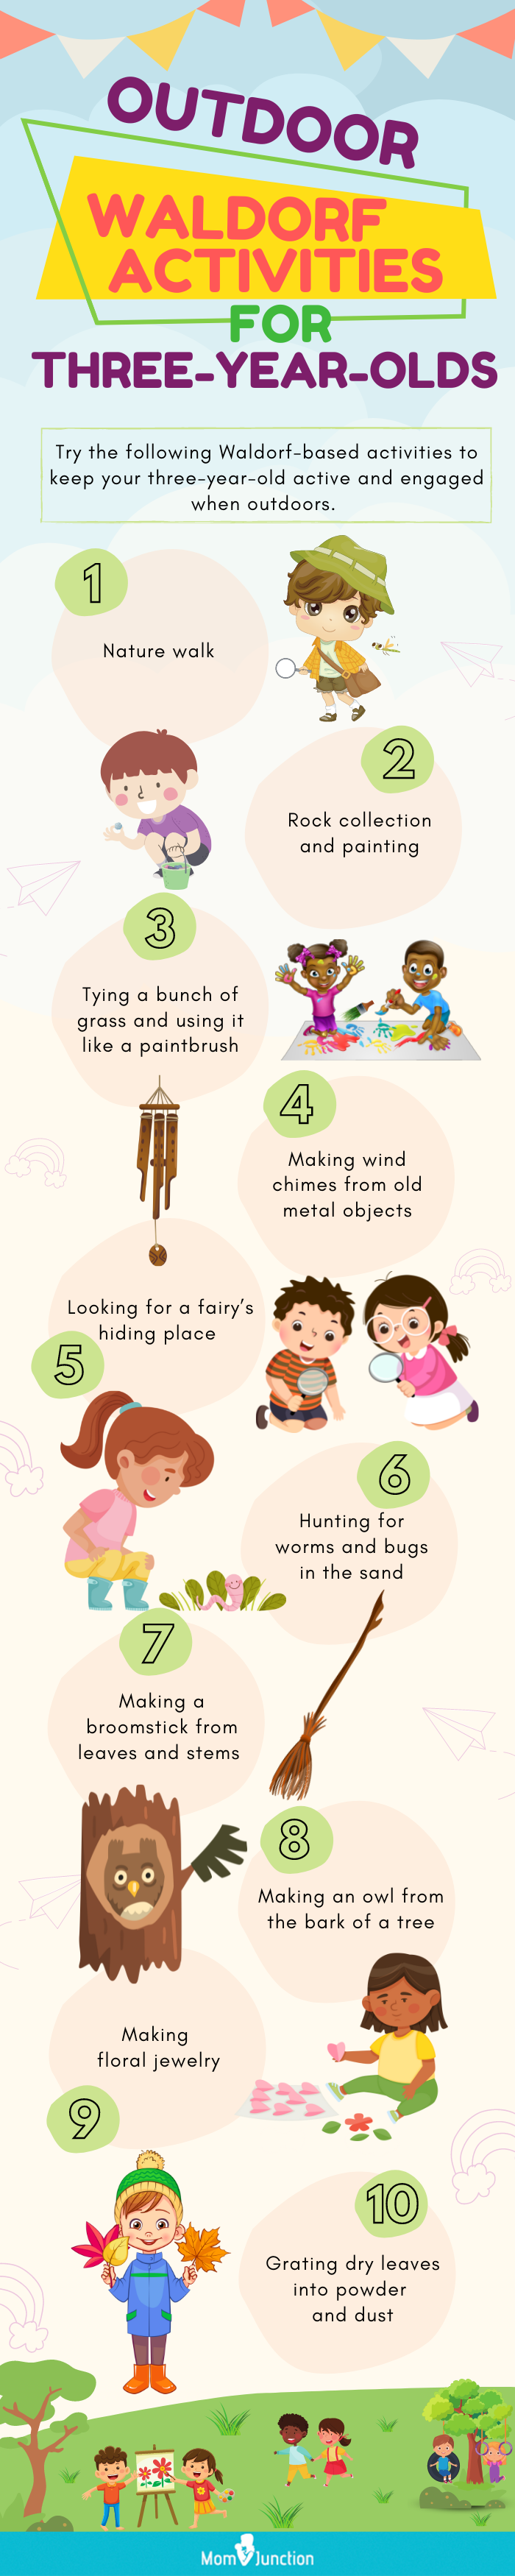 outdoor waldorf activities for three year olds [infographic]